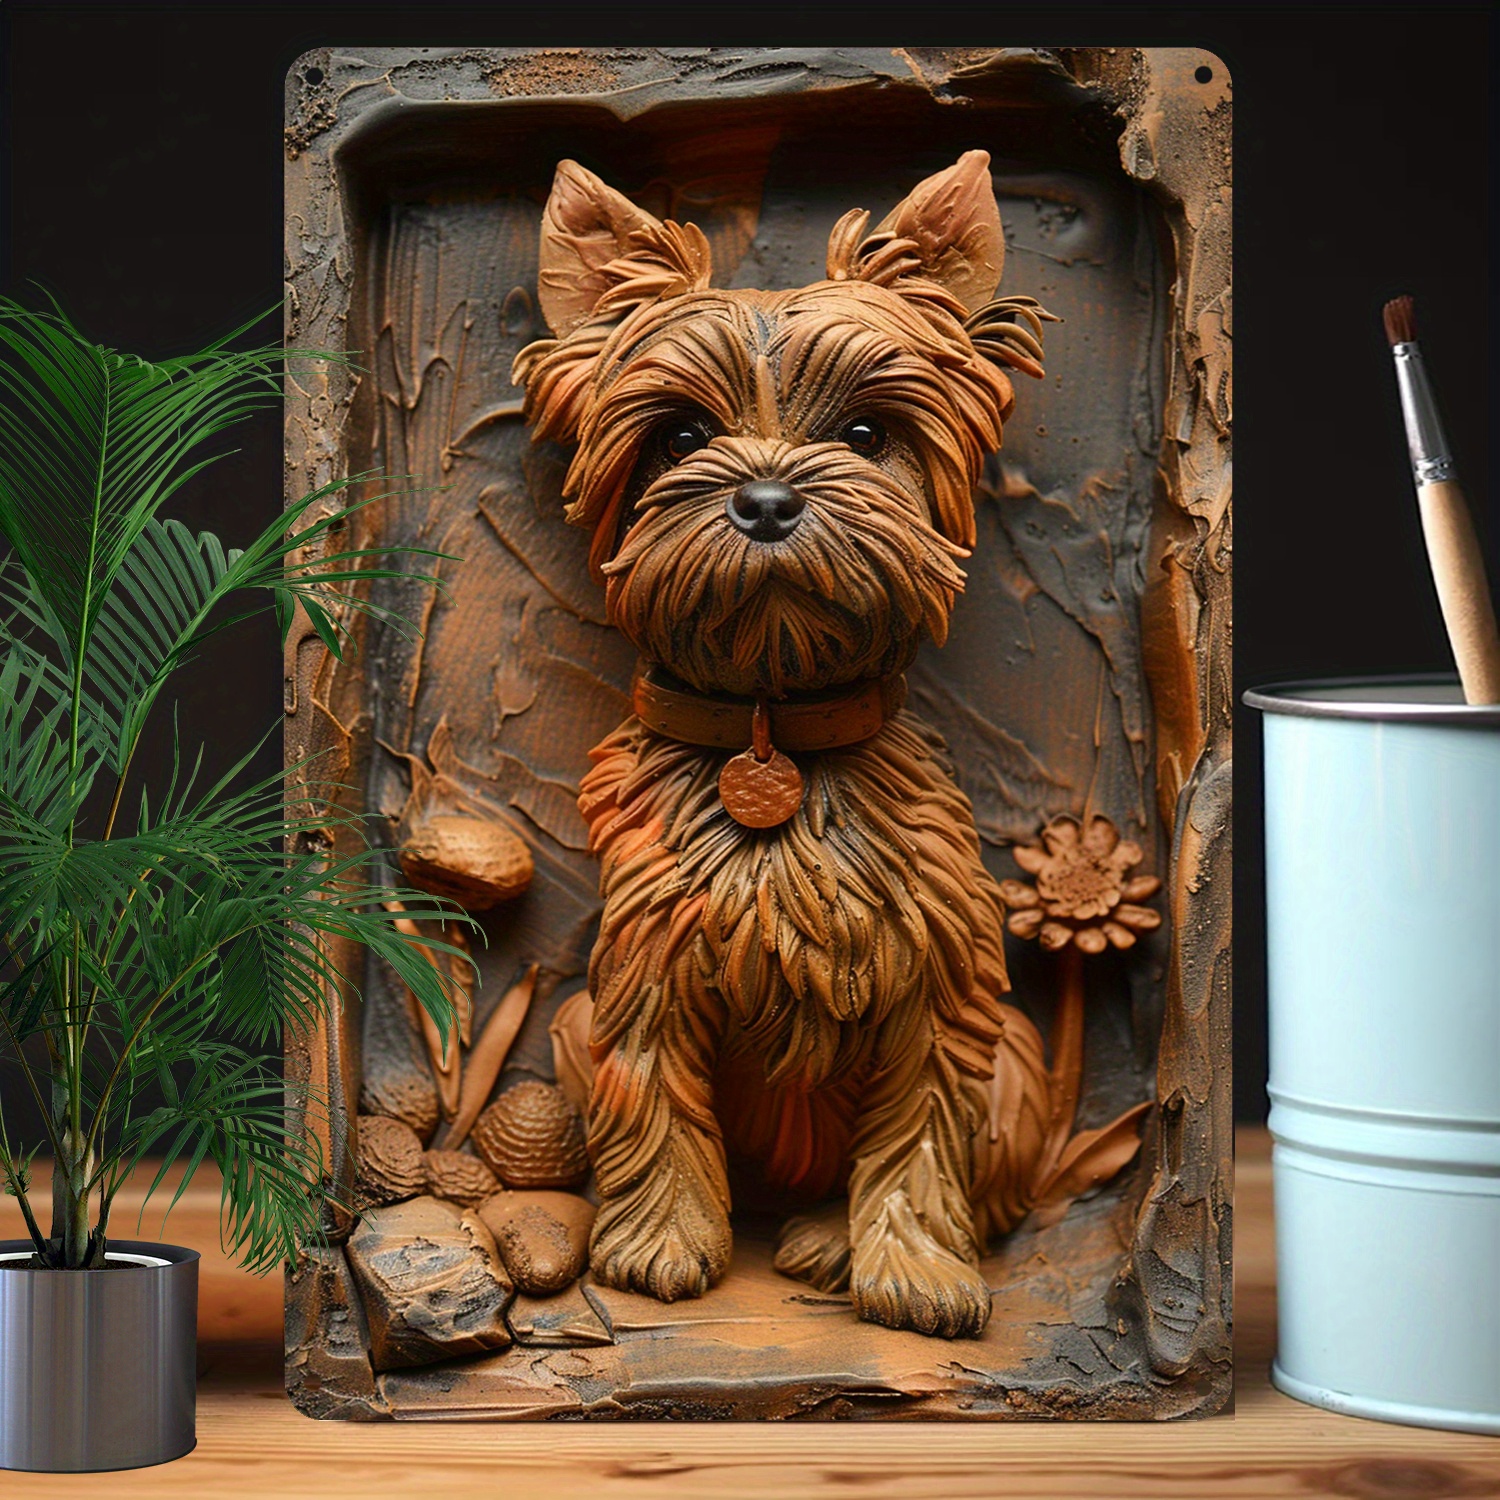 

1pc Yorkshire Terrier Aluminum Artwork With 3d Relief Effect - 8x12 Inch Durable Metal Wall Decor For Home, Garden, And Bathroom, Moisture Resistant, High Bend Resistance - Dog Lovers Gift A1954